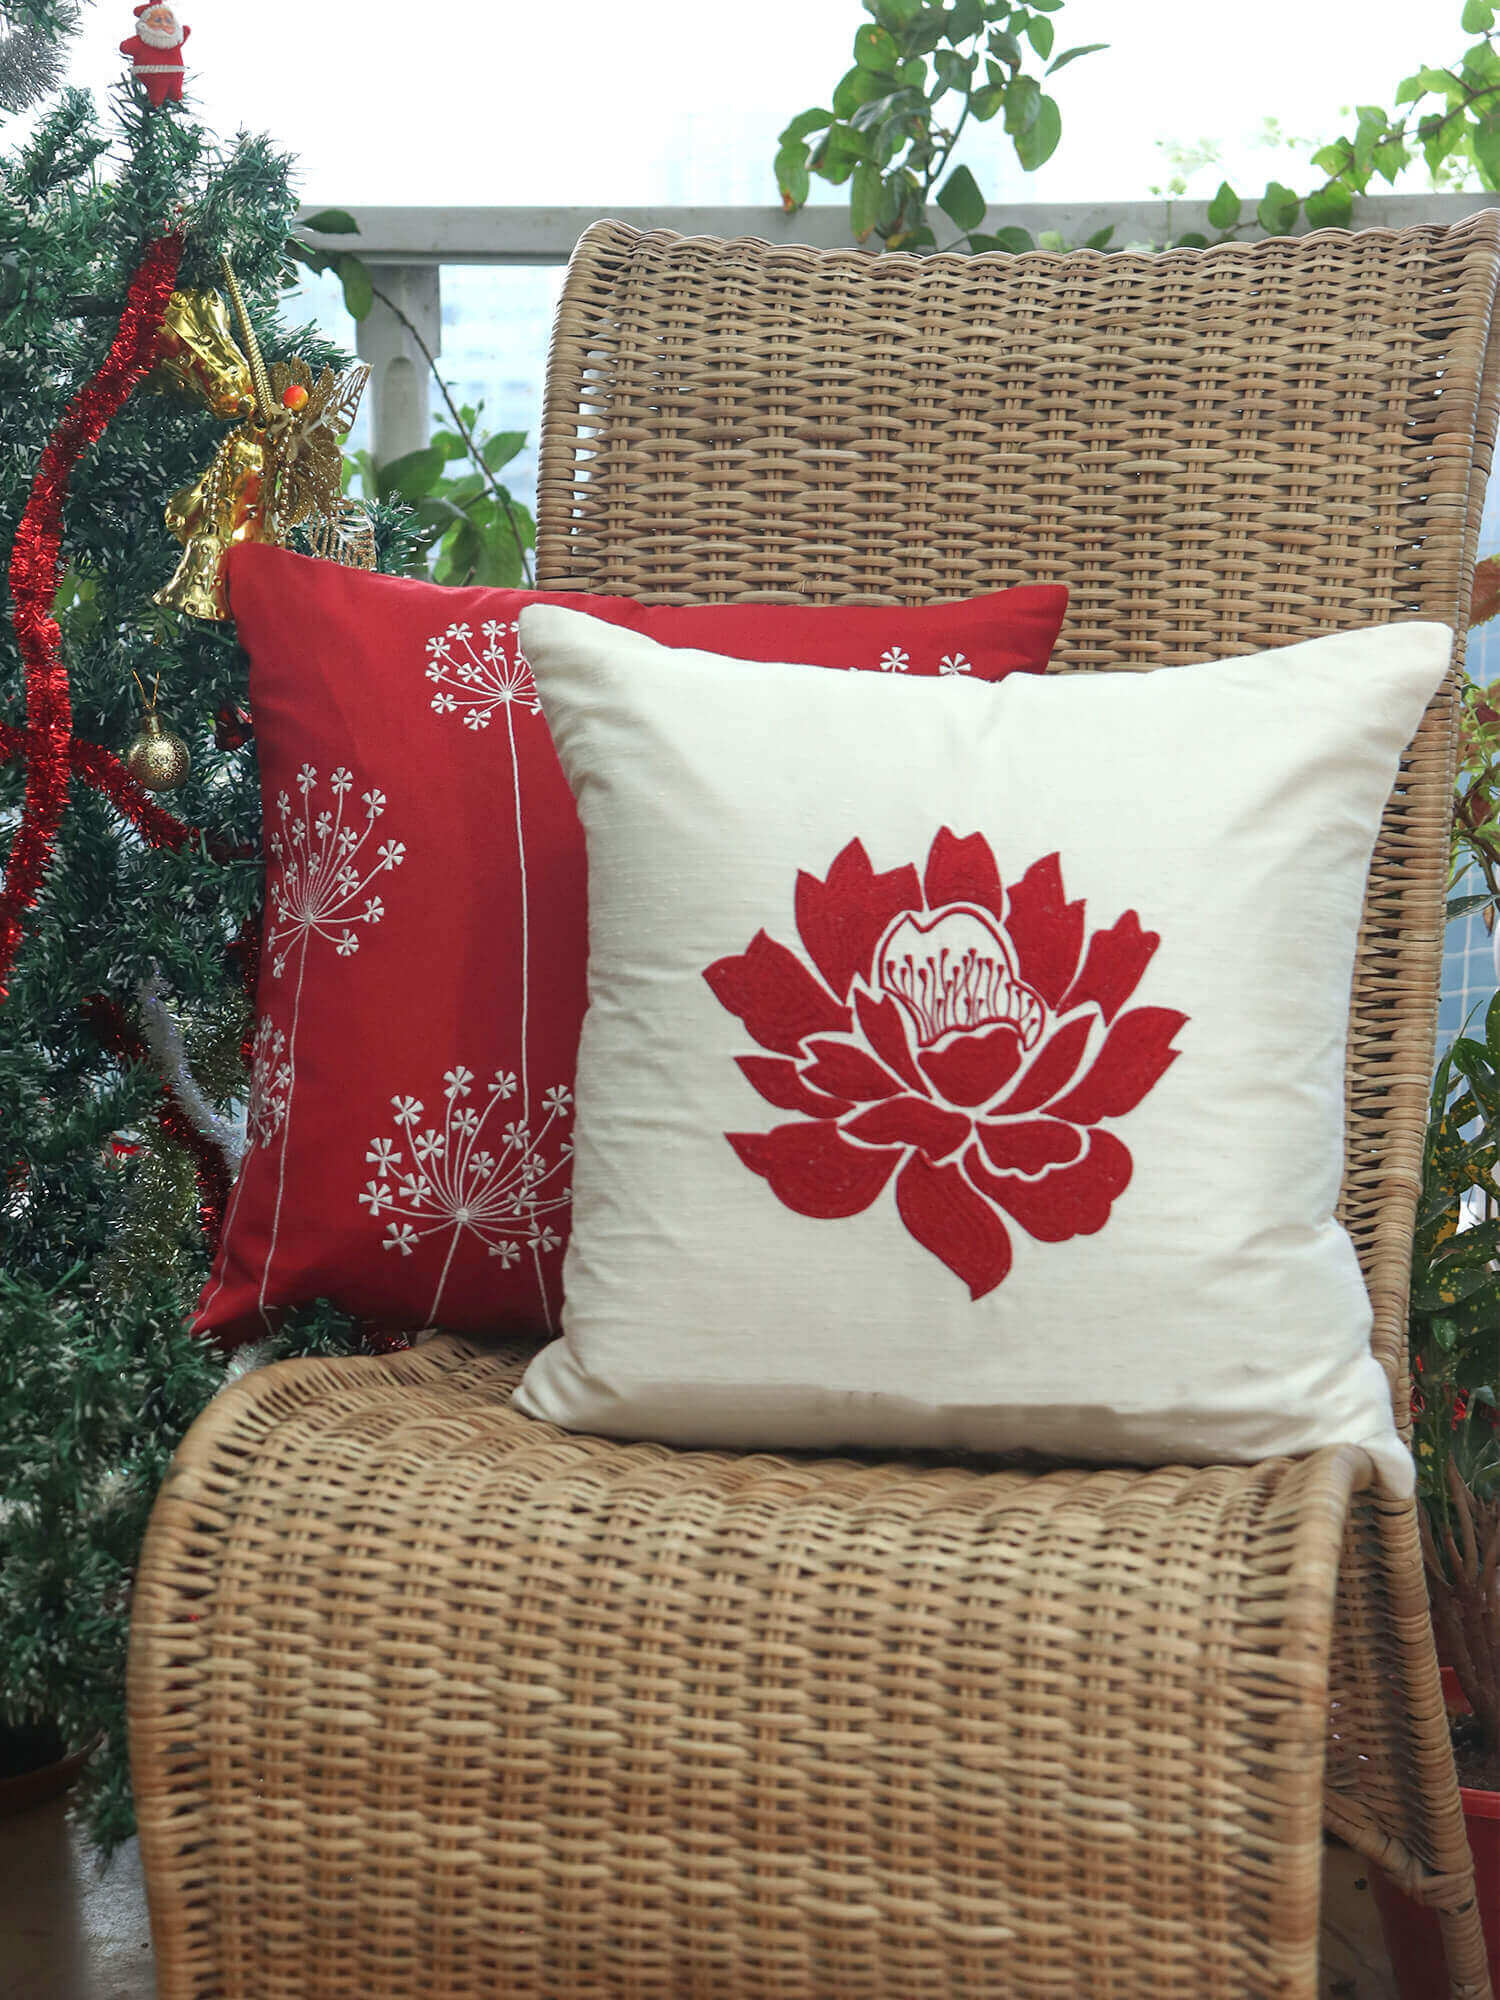 ZEBA World Christmas Cushion Cover for Sofa, Bed | Embrodeired Floral Dandelions - Polycanvas | Red White - 16x16in (40x40cm) (Pack of 2)